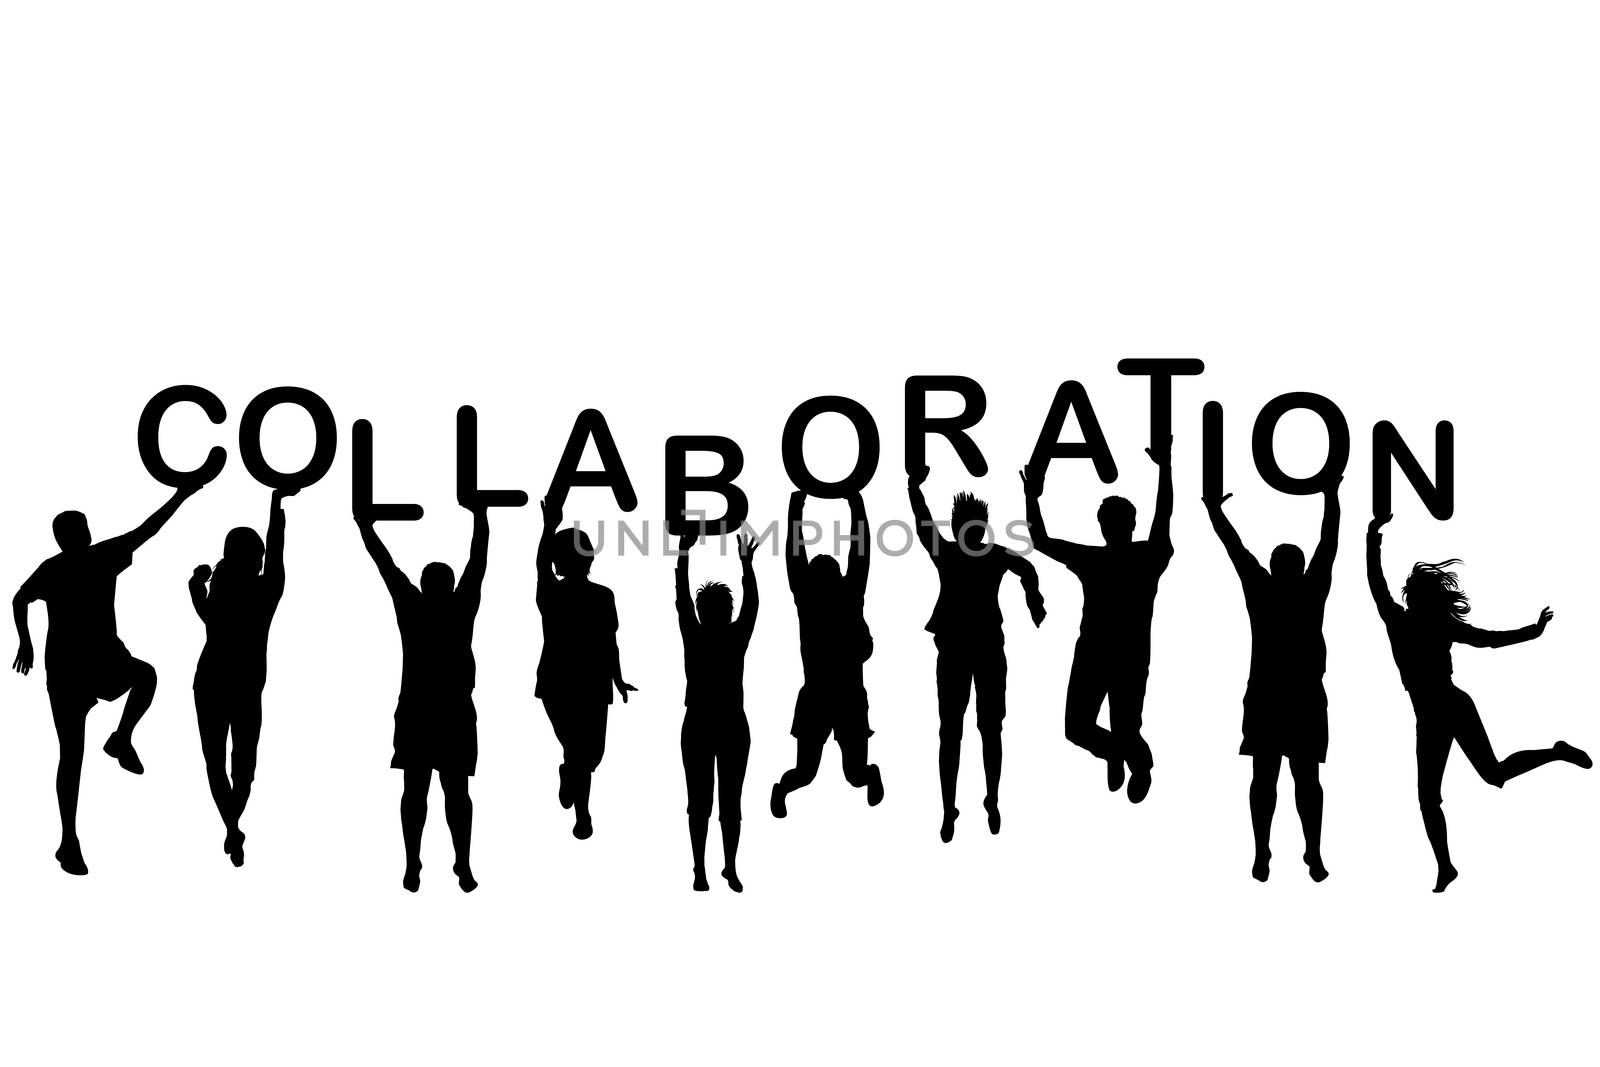 People silhouettes holding letter with word Collaboration